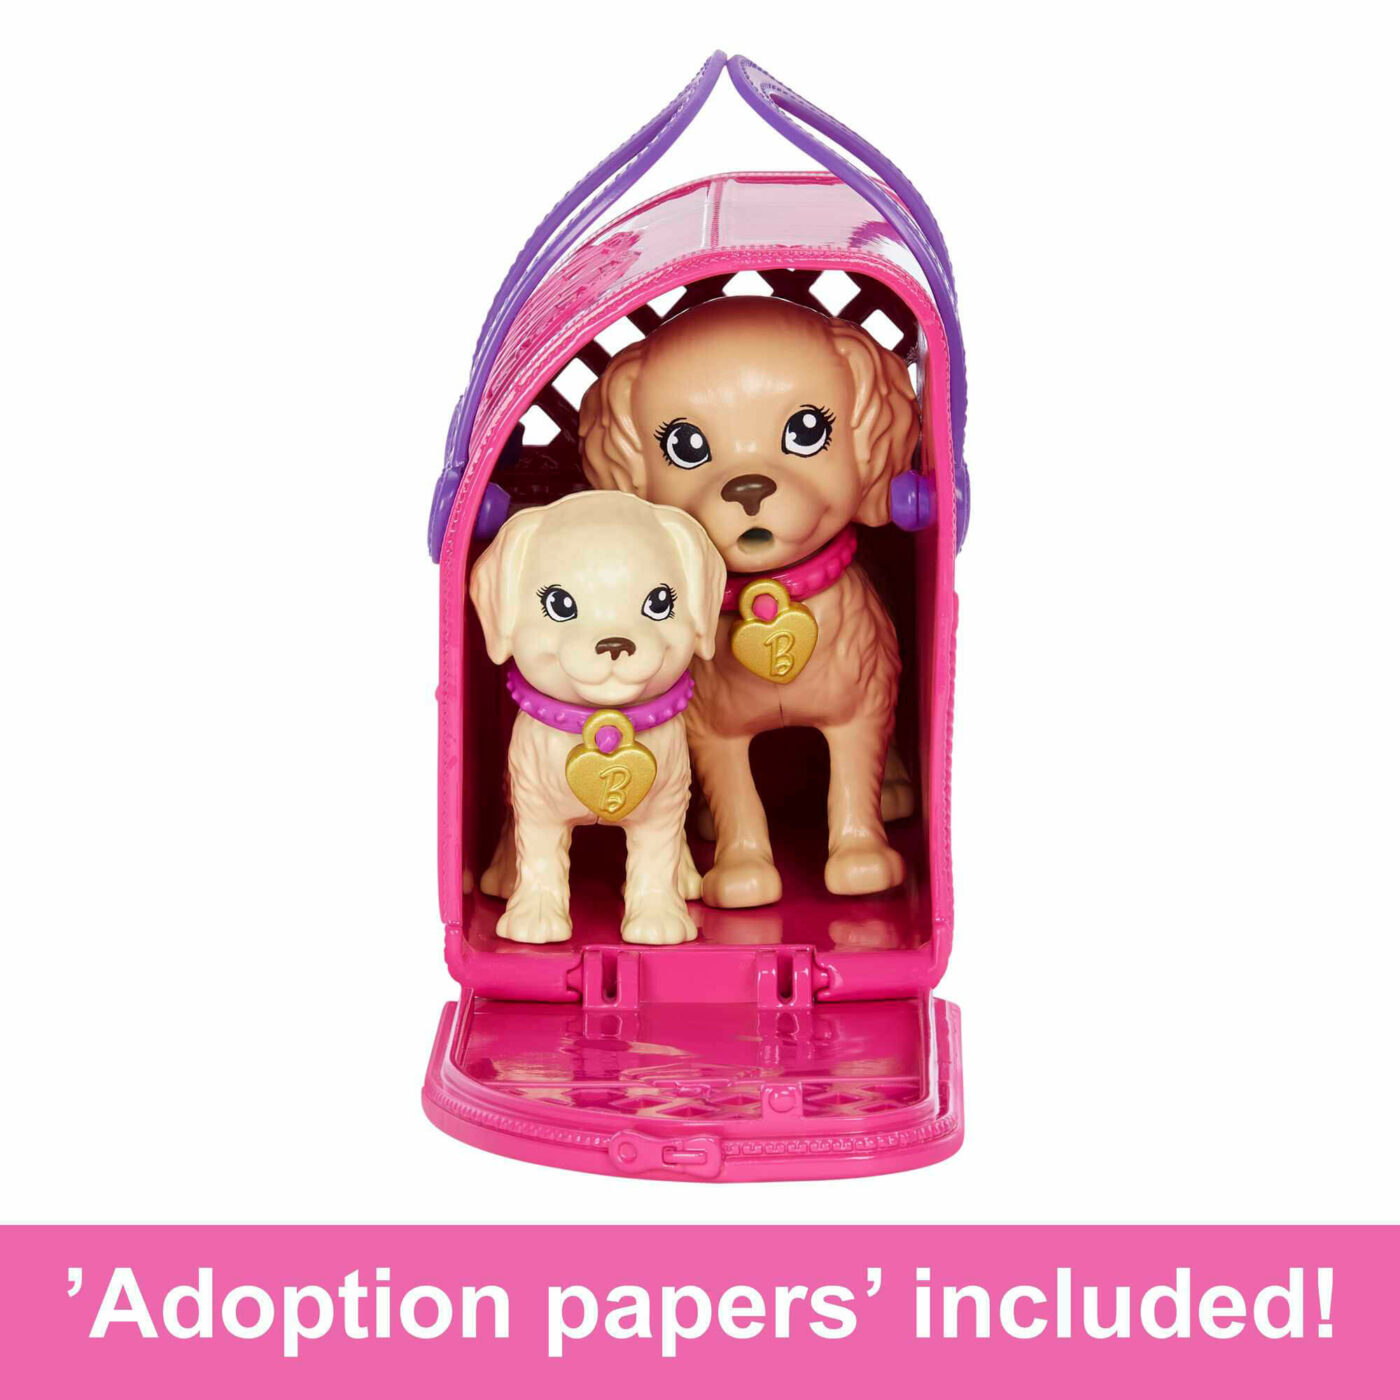 Barbie - Pup Adoption Doll and Accessories5